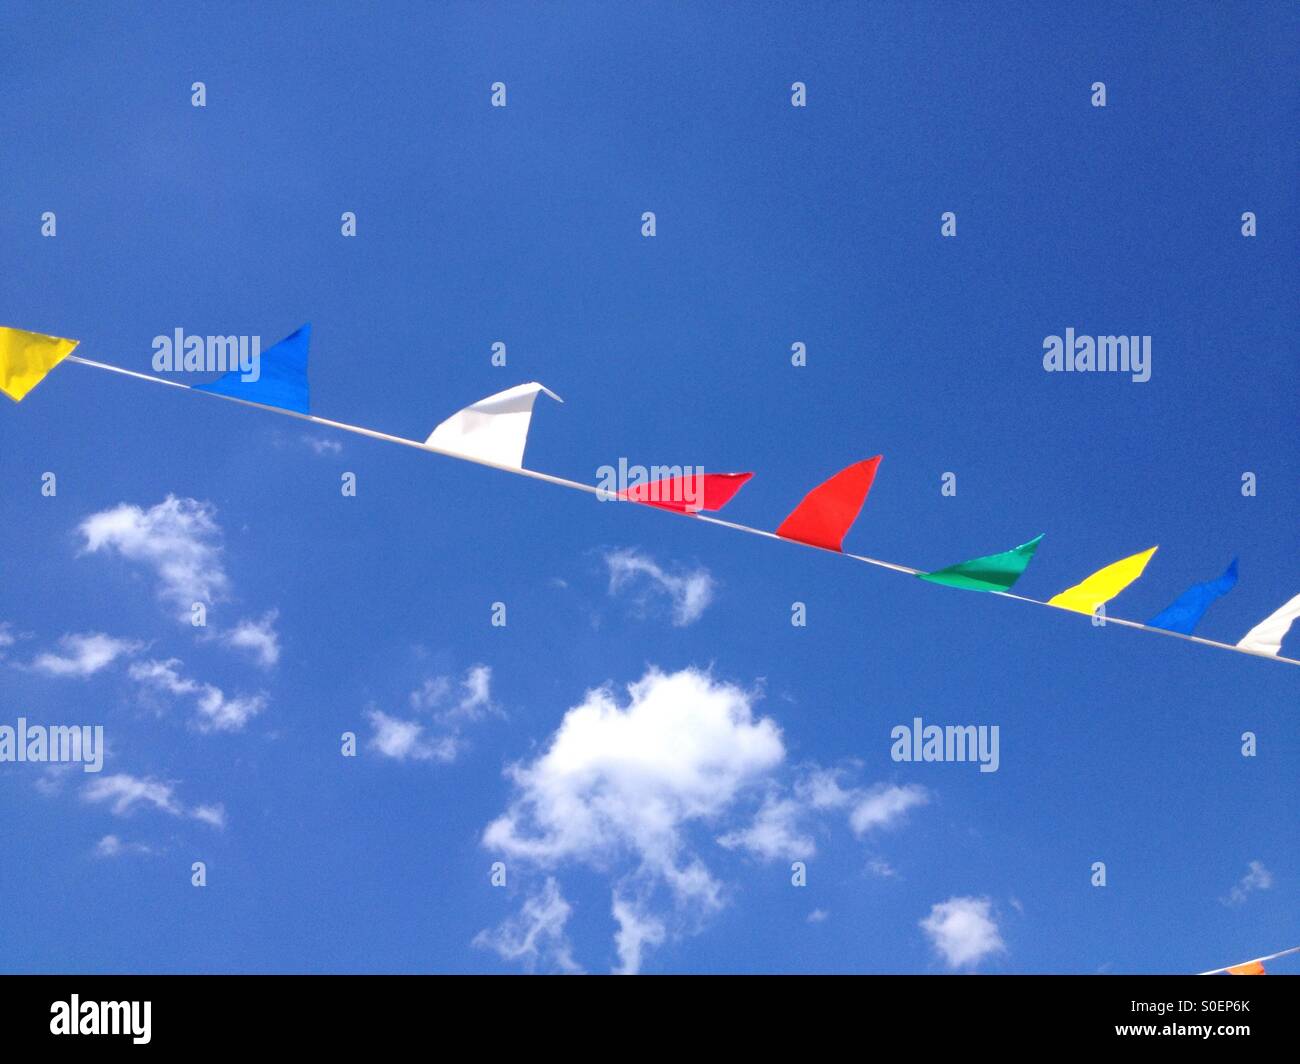 Flying Flags Stock Photo